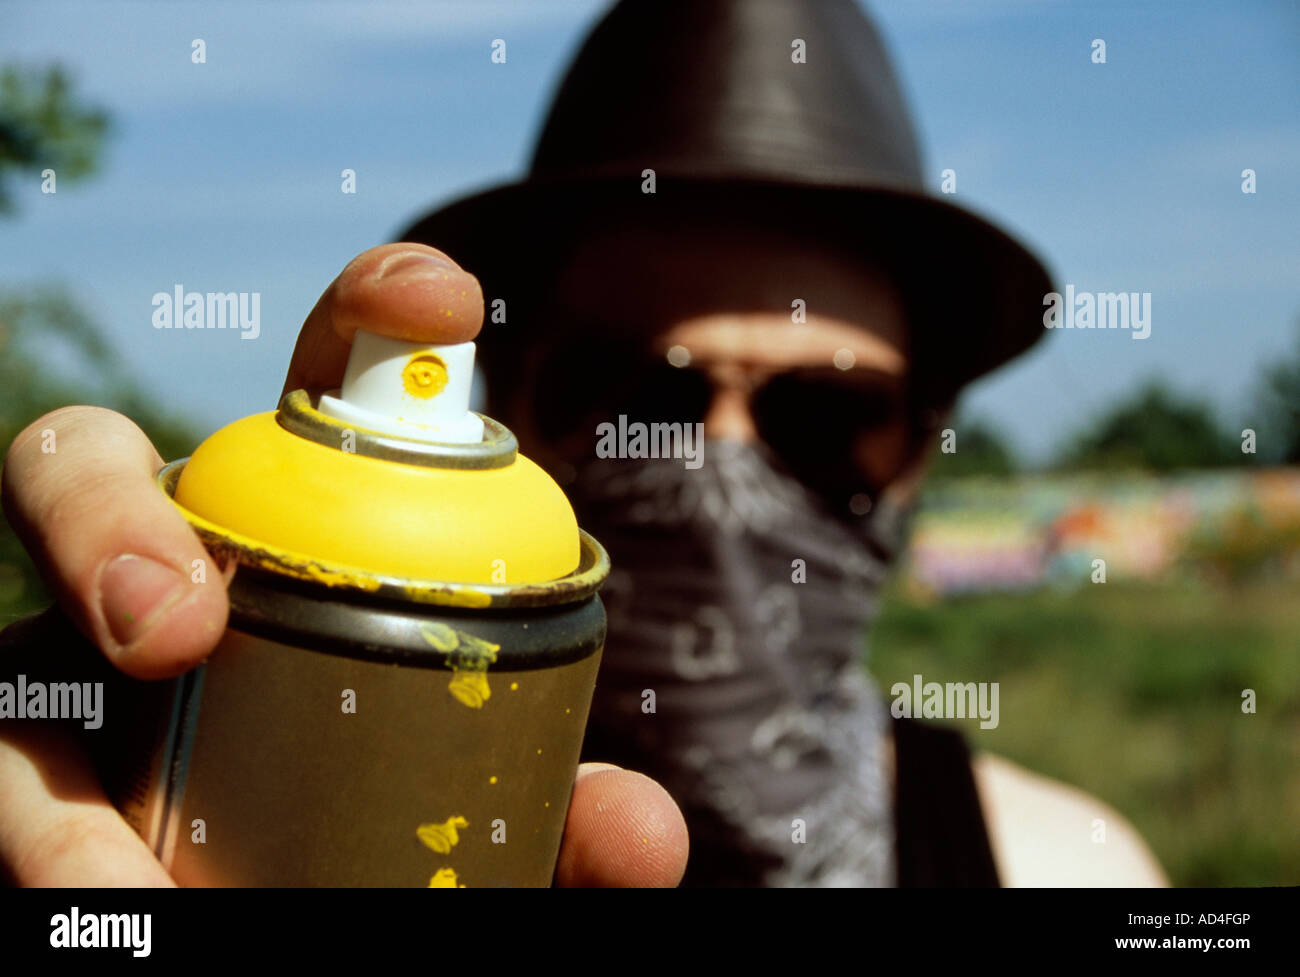 A man holding a can of spray paint Stock Photo